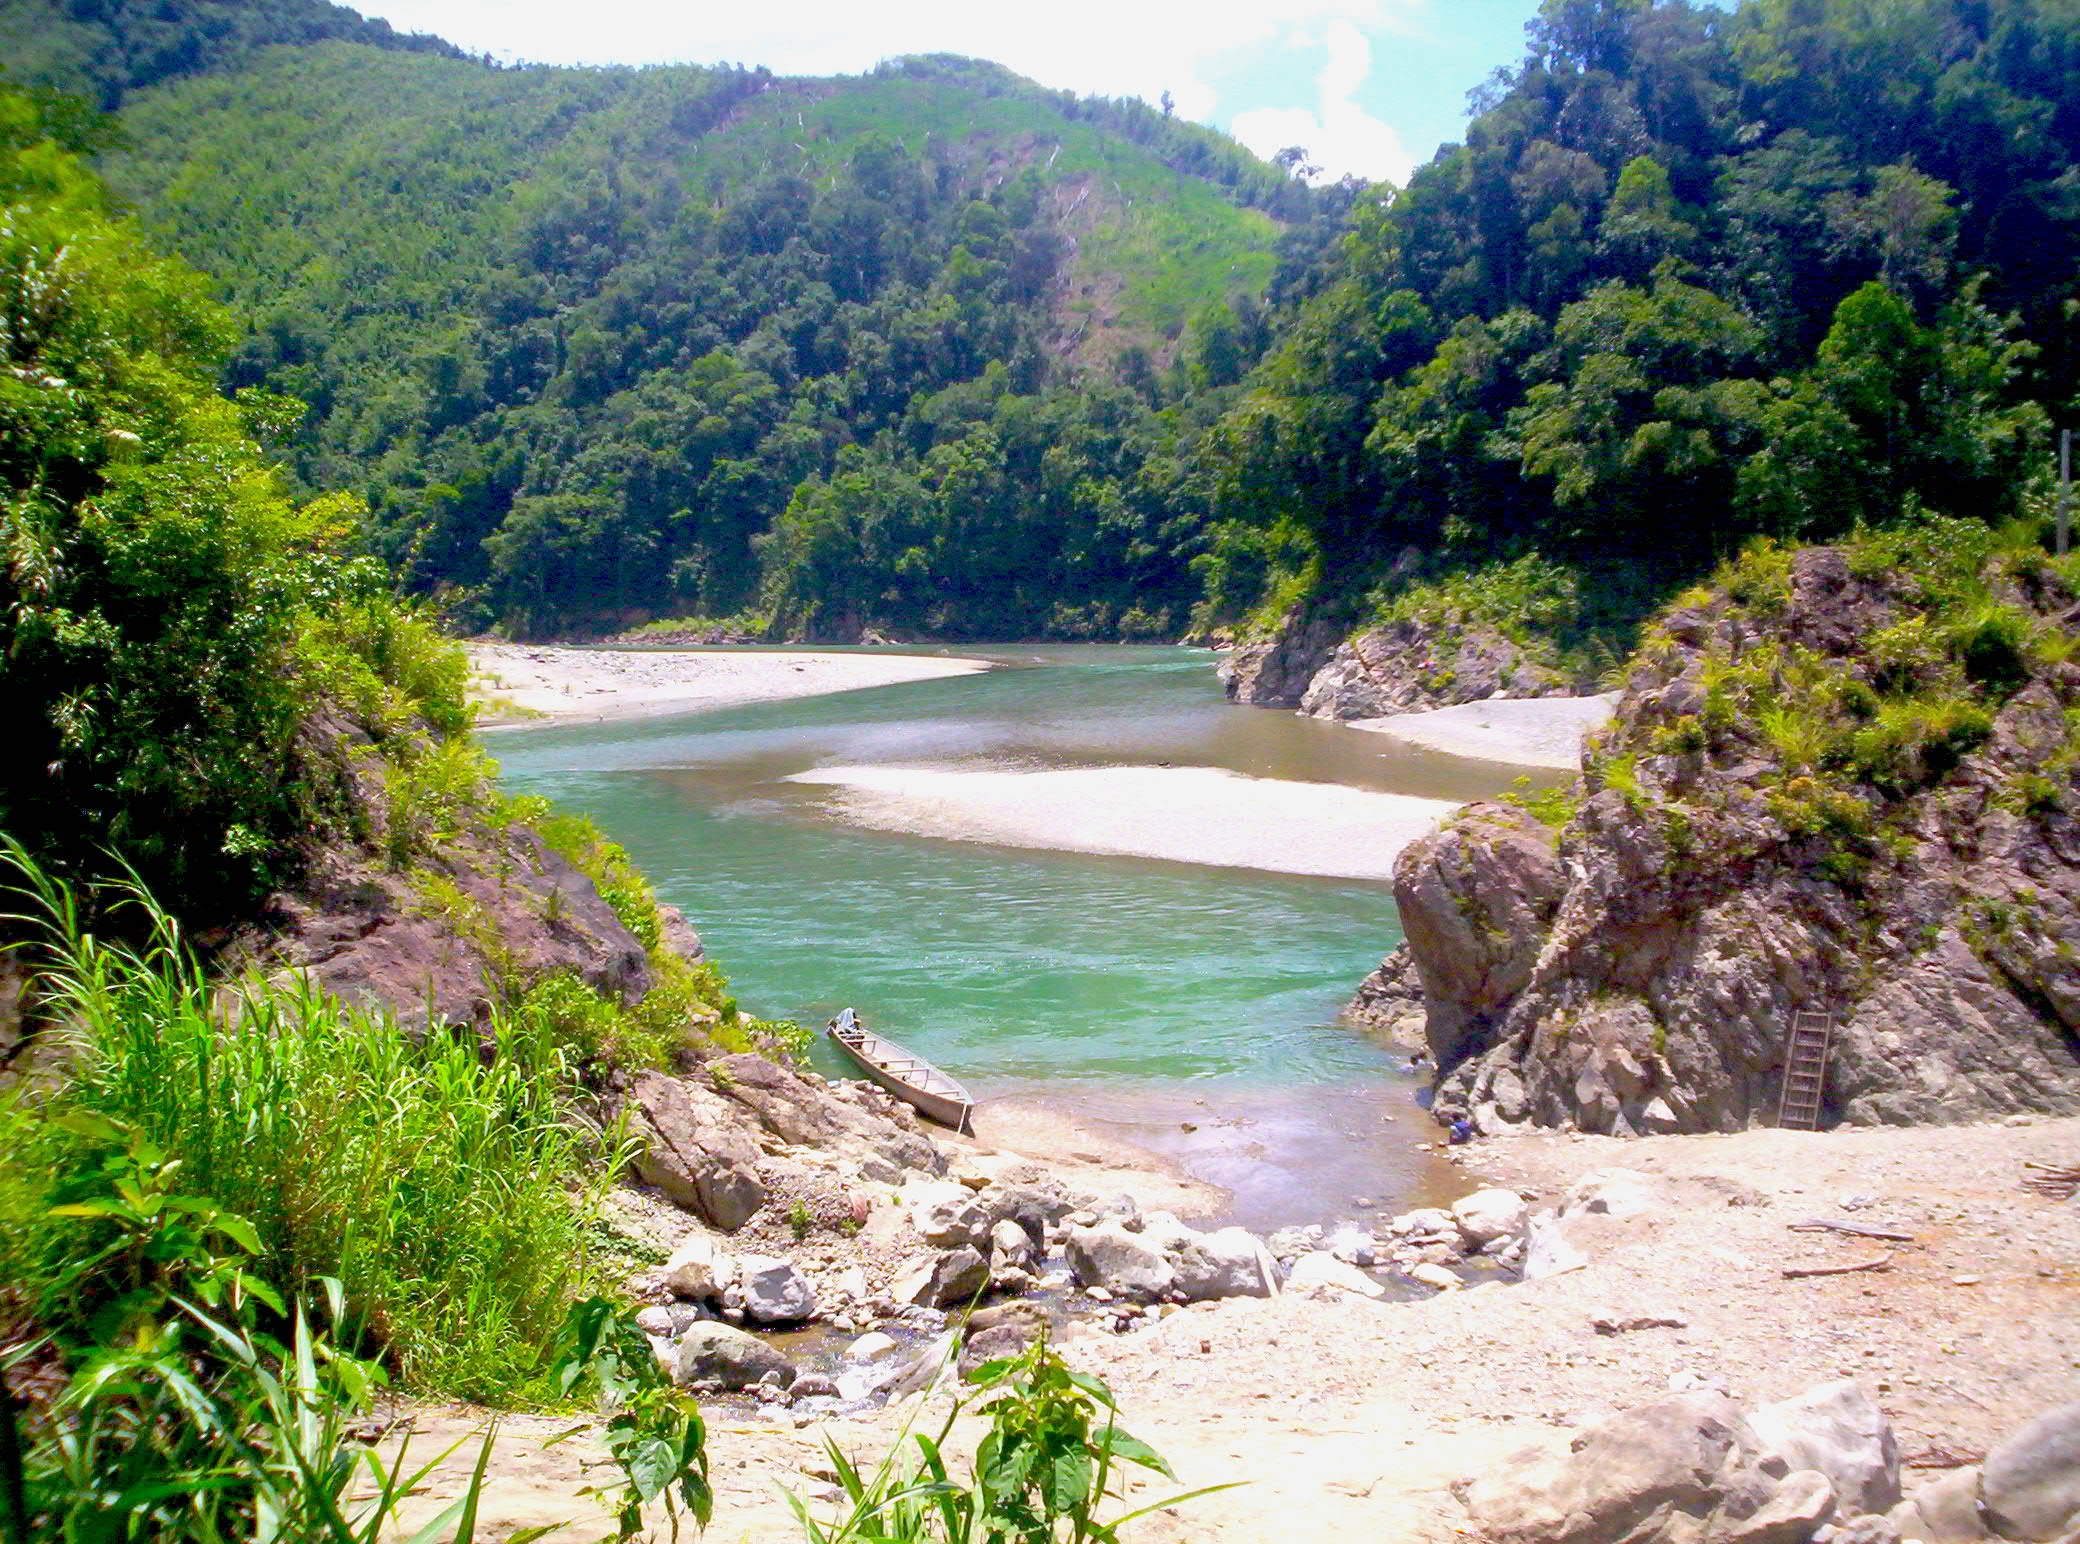 Philippines Environment Secretary Gina Lopez says that the safety of her country’s watersheds and freshwater resources is a top priority. The Dibagat River is a prime example of the country's freshwater bounty. Photo courtesy of Creative Commons